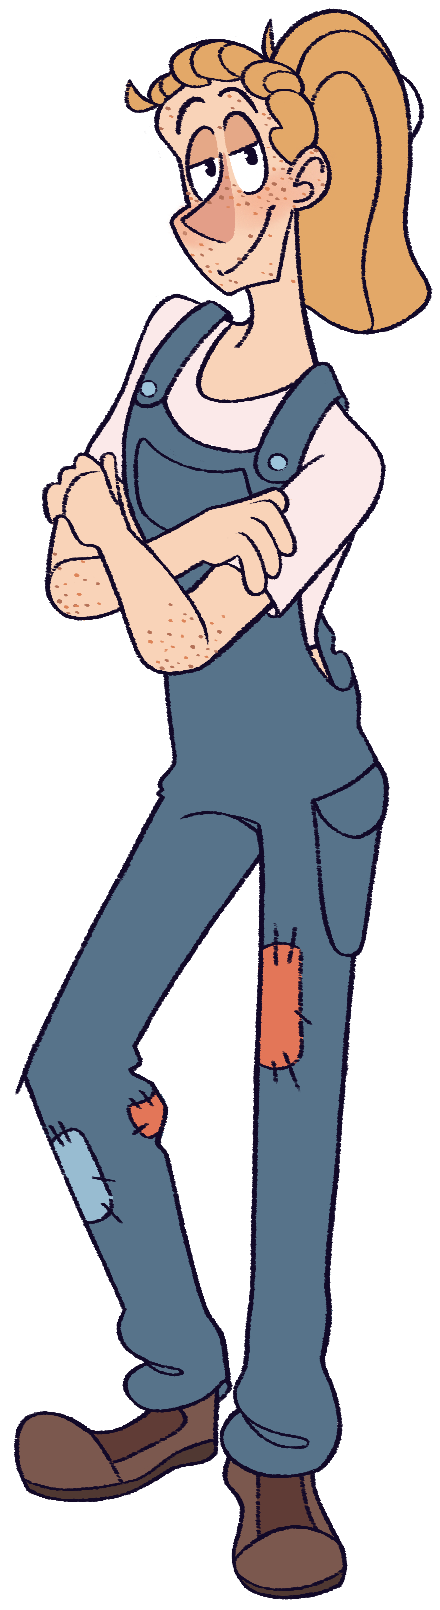 A fullbody drawing of Tyler; she has blonde hair in a ponytail and freckles. She wears blue overalls and a white t-shirt underneath. She has a calm smile on her face.